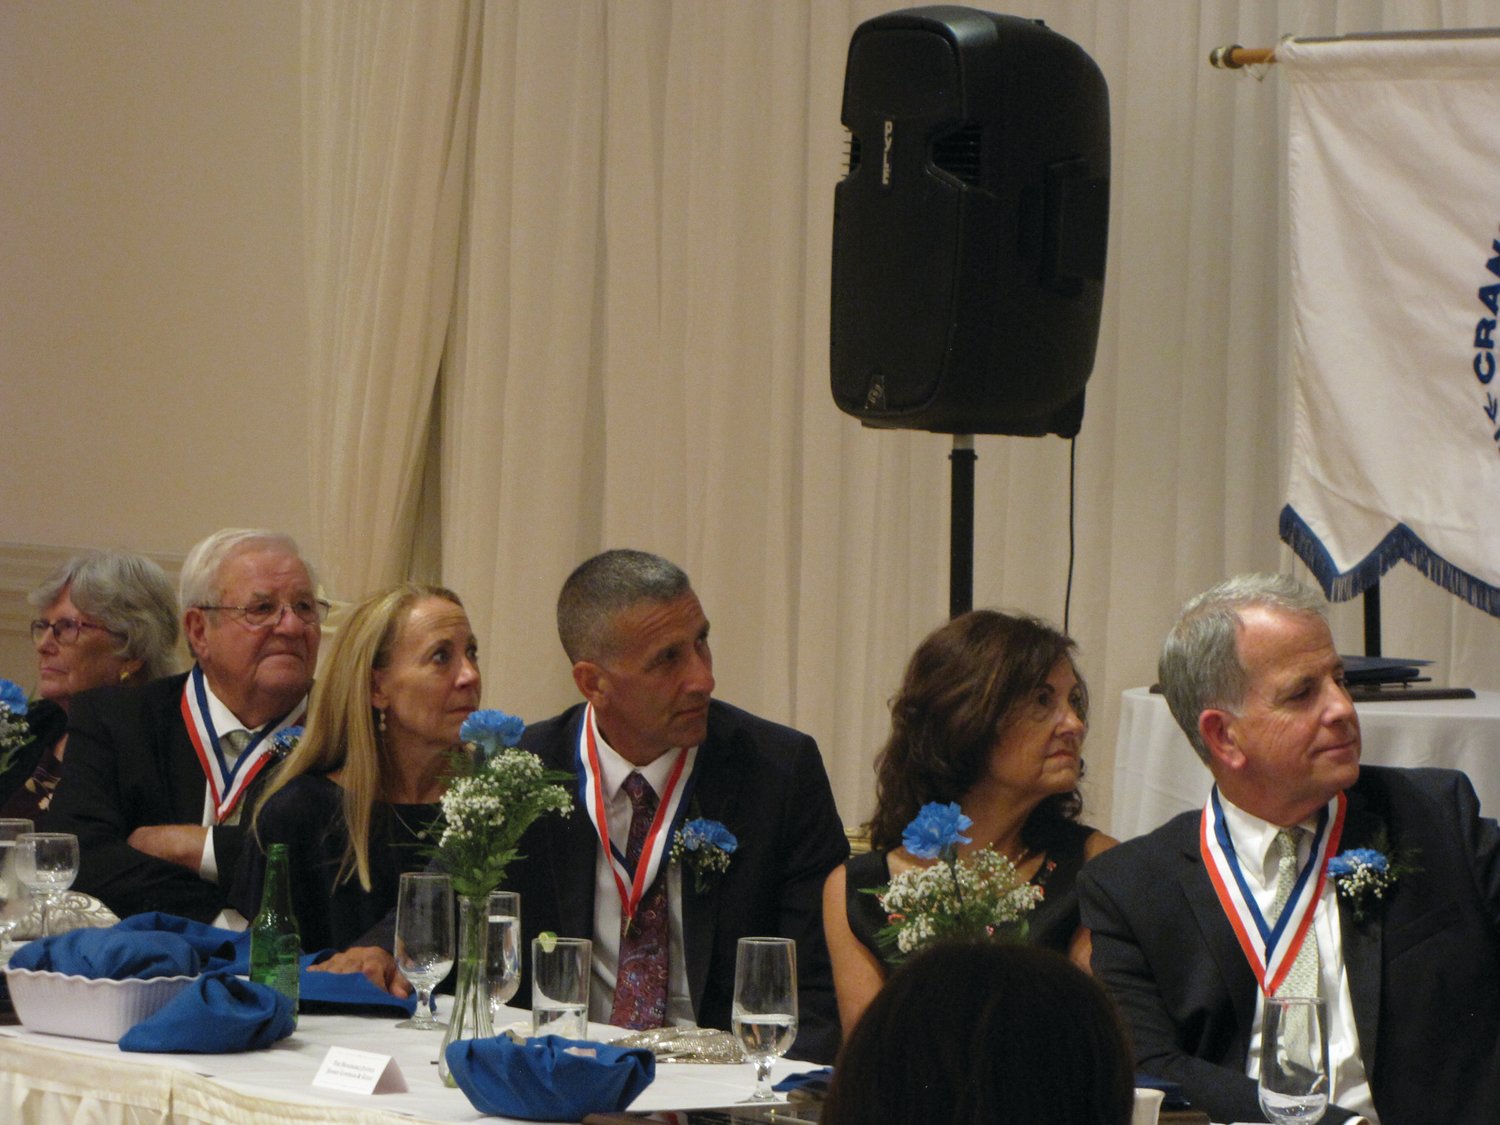 HEAD TABLE: From left, Carol and William Stamp, Diana and John Macera, and Kathleen and Jeffrey Lanphear look on during Anthony Tomaselli’s Hall of Fame induction speech.